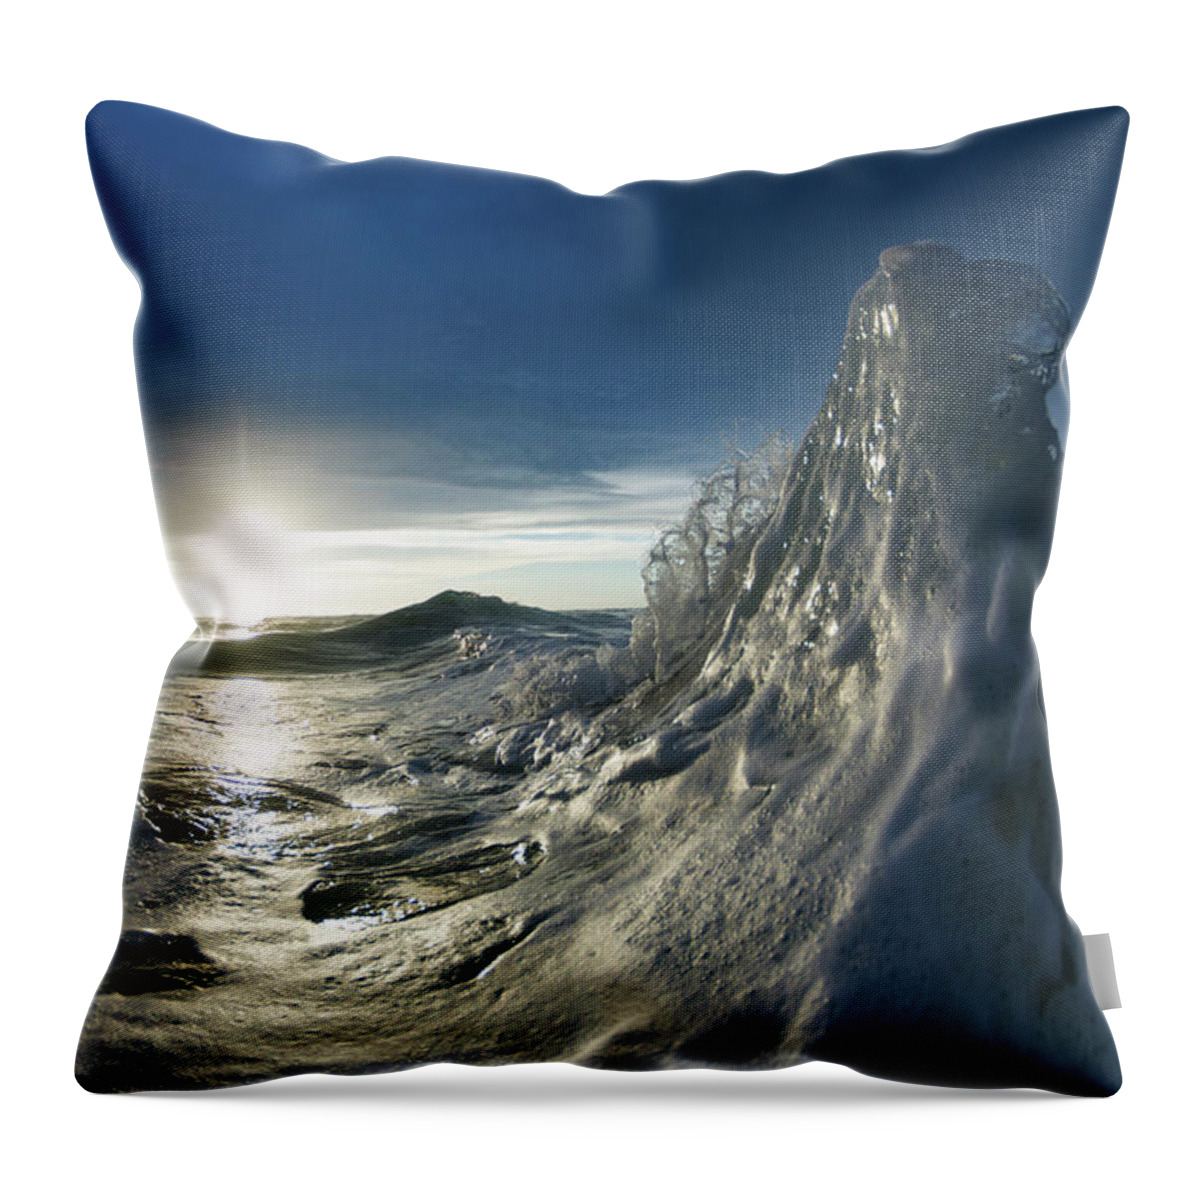 Waves Throw Pillow featuring the photograph Talk To The Hand by Sean Davey